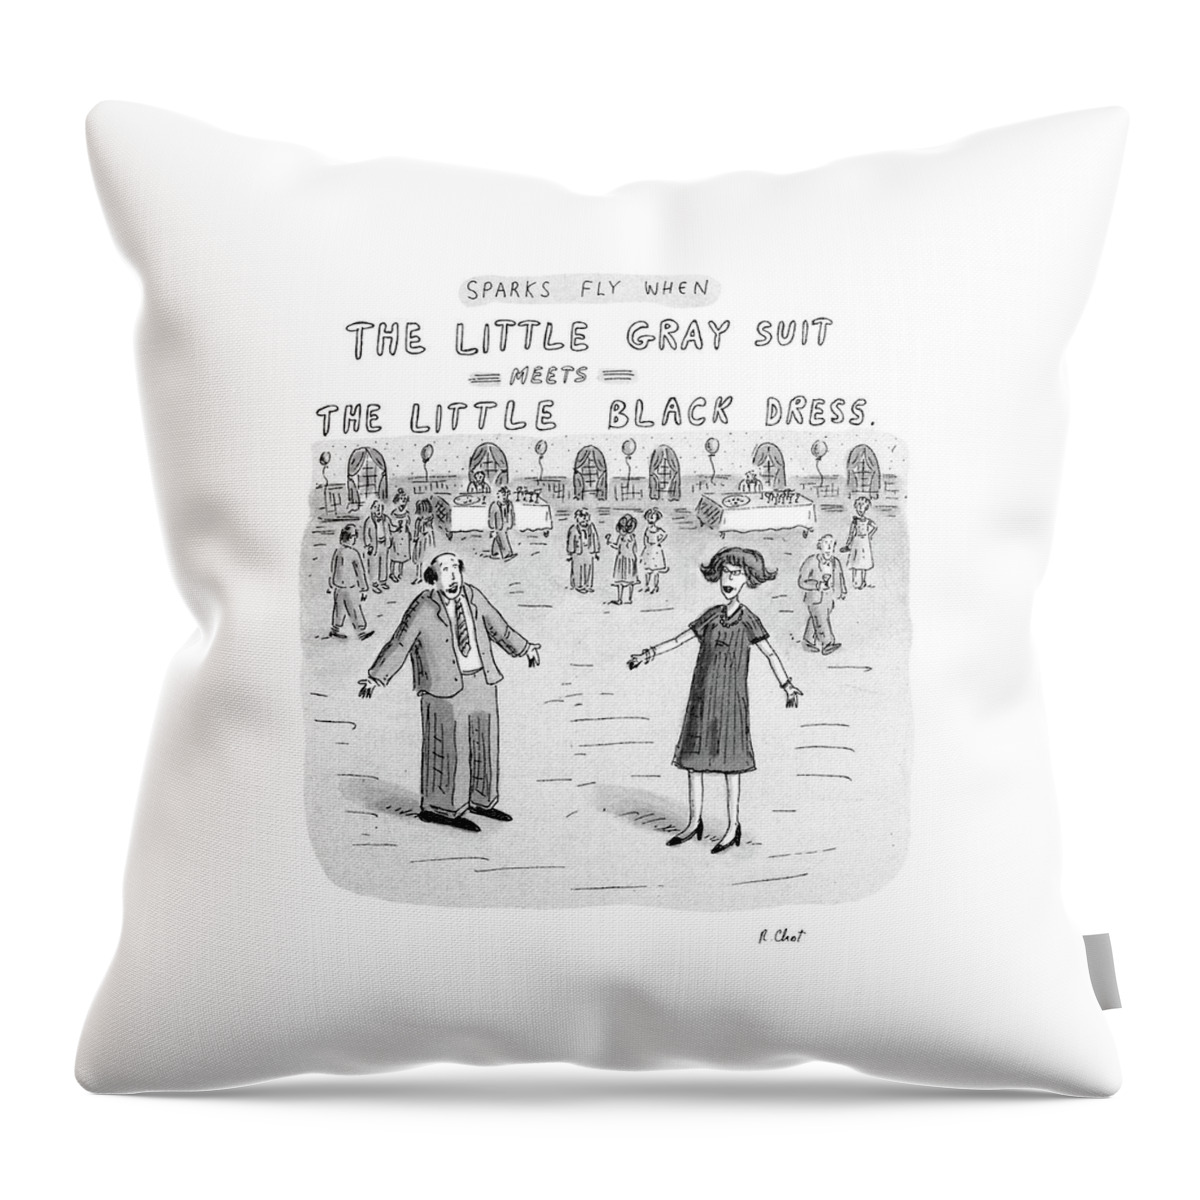 Sparks Fly When The Little Gray Suit Meets Throw Pillow